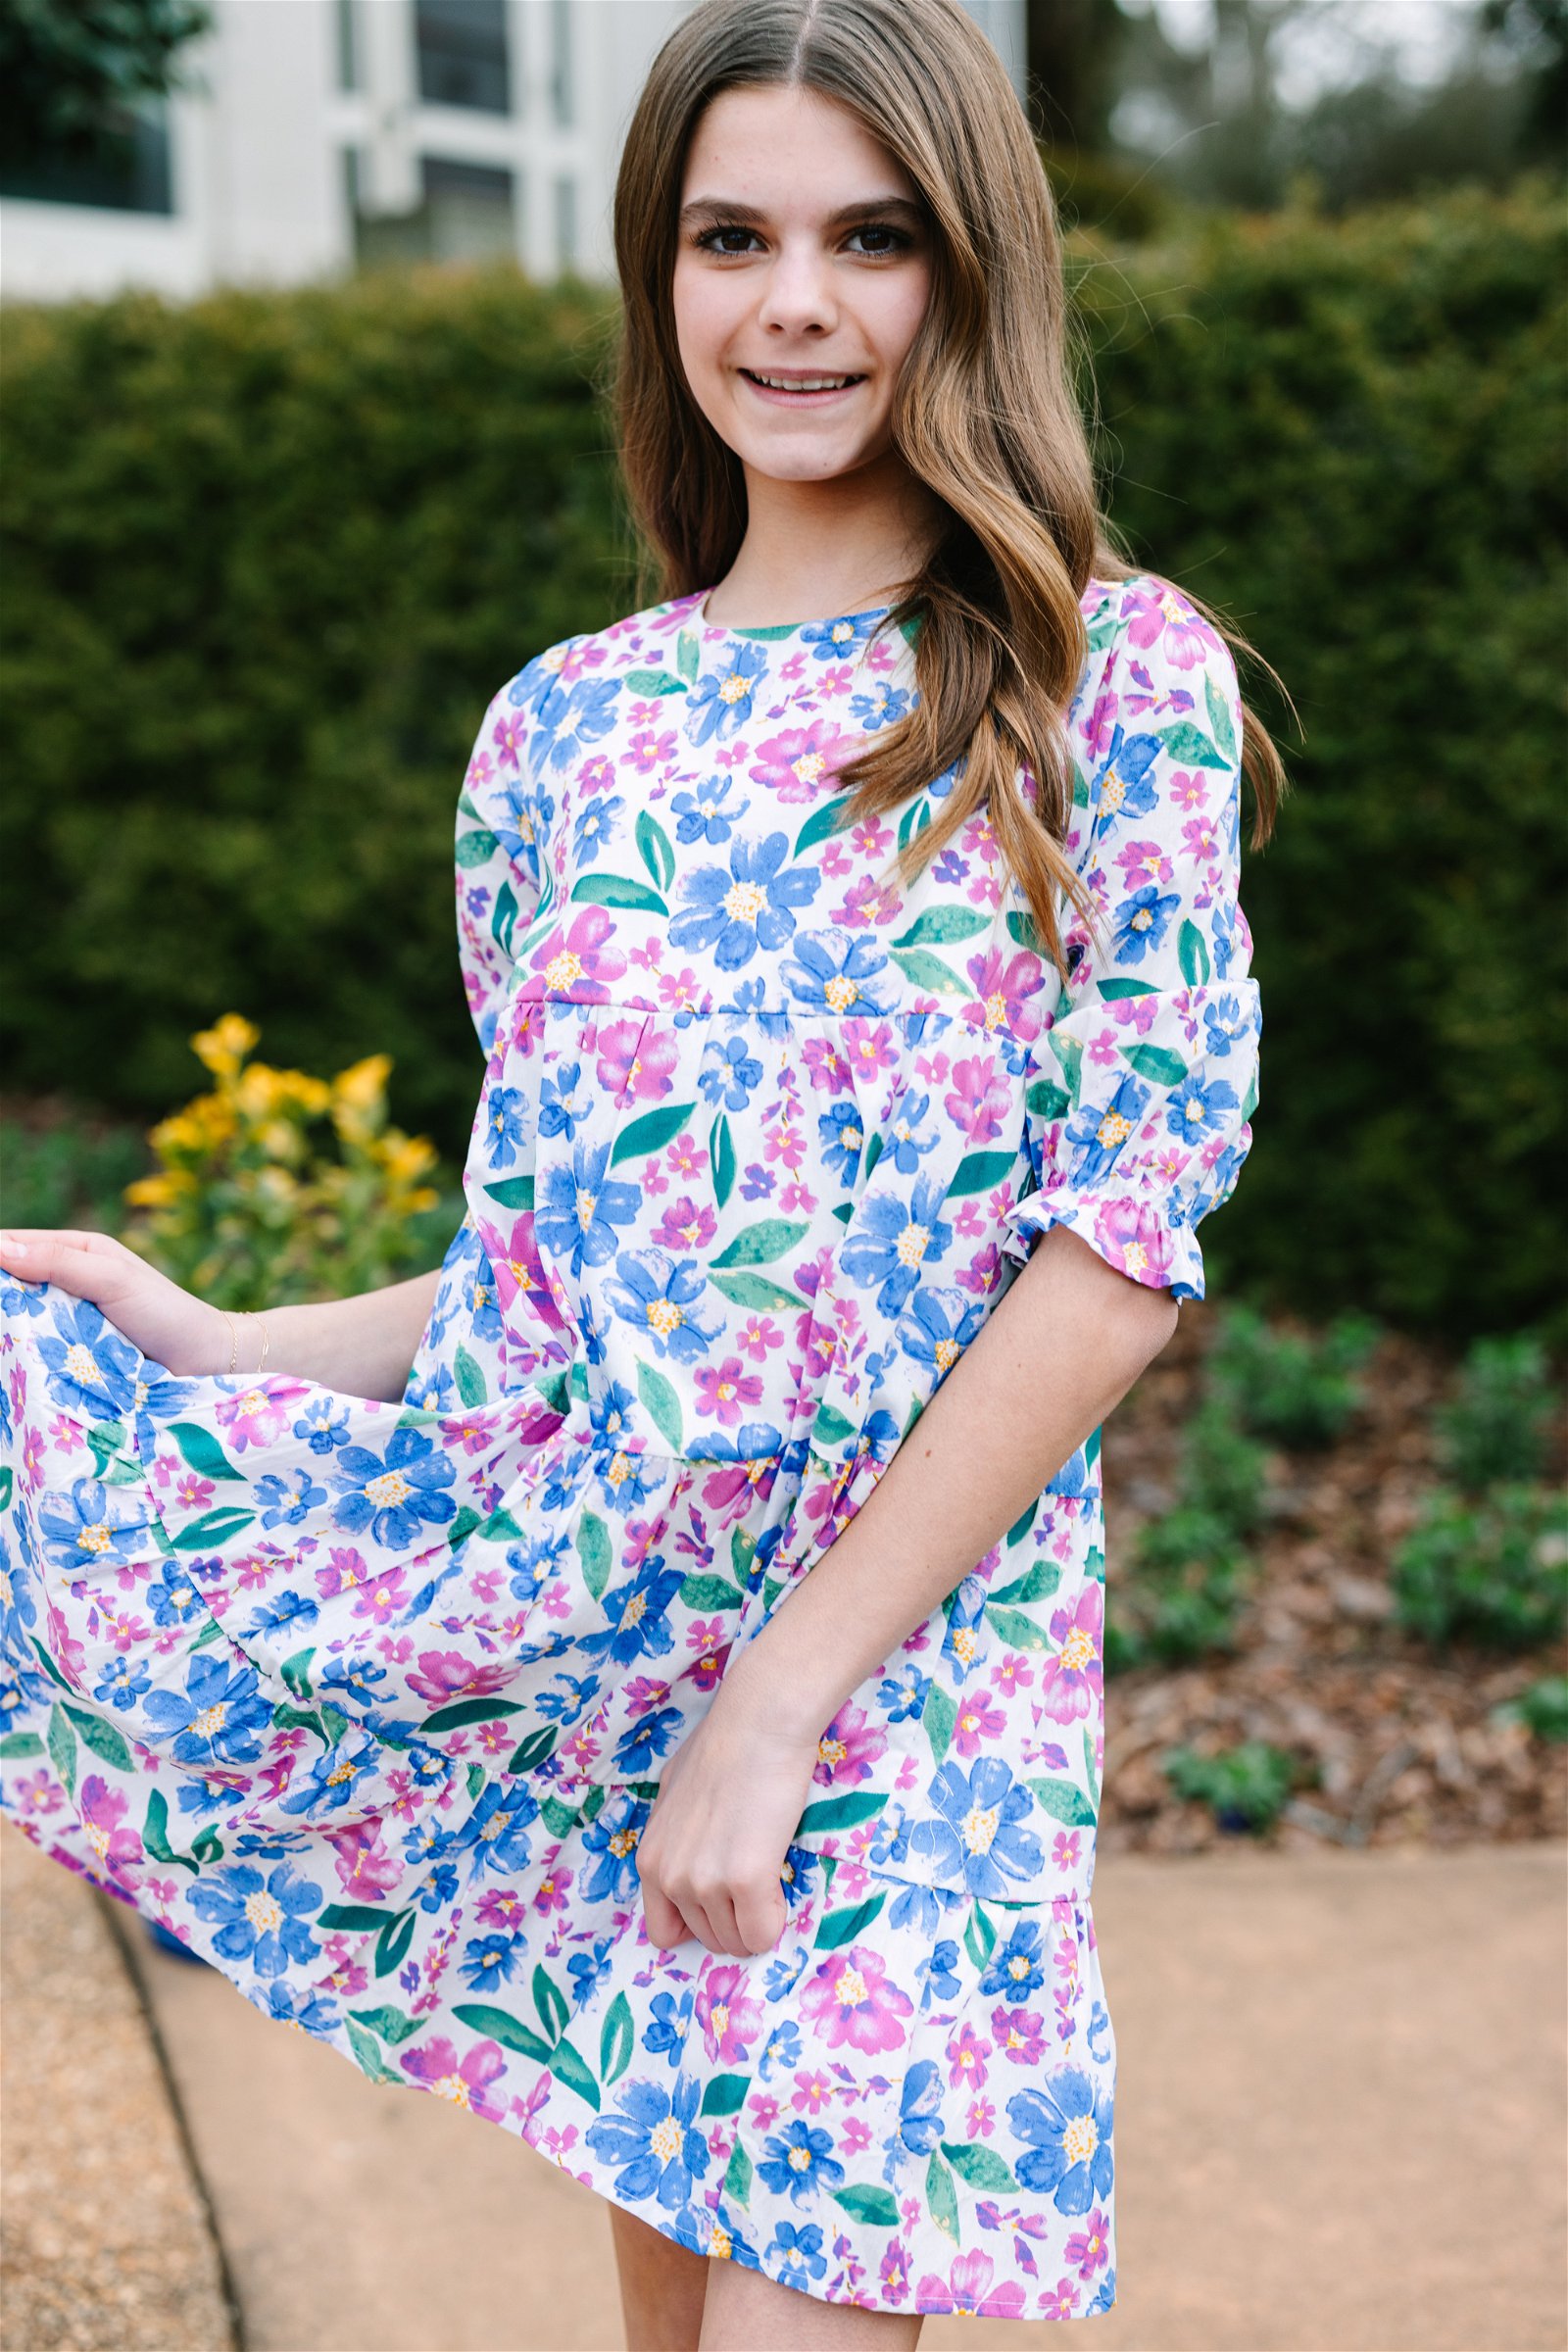 Girls: Hoping For Fun Blue Floral Dress